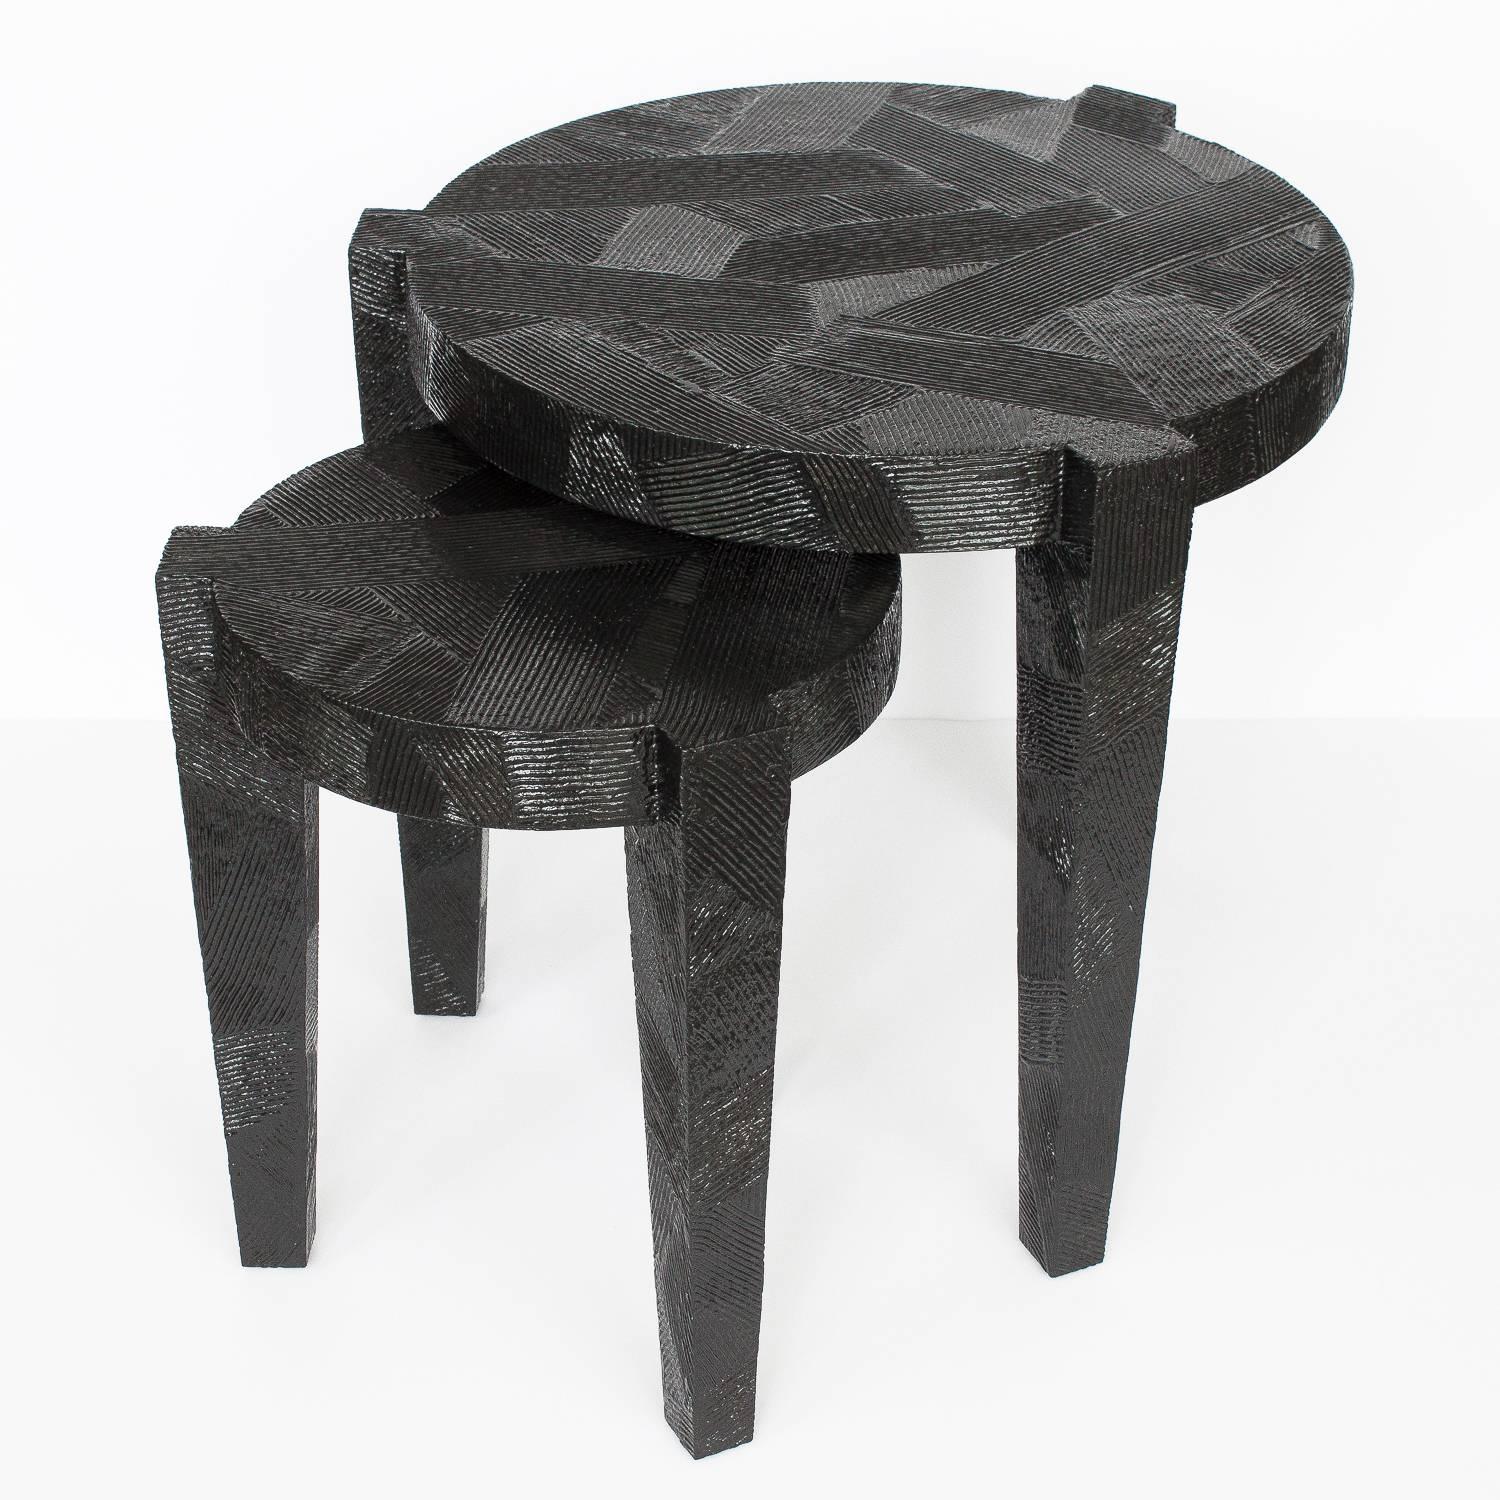 Set of two black lacquered raked textured nesting side tables. Three legged design. Tapered square legs protrude from the round table surface. 2.25